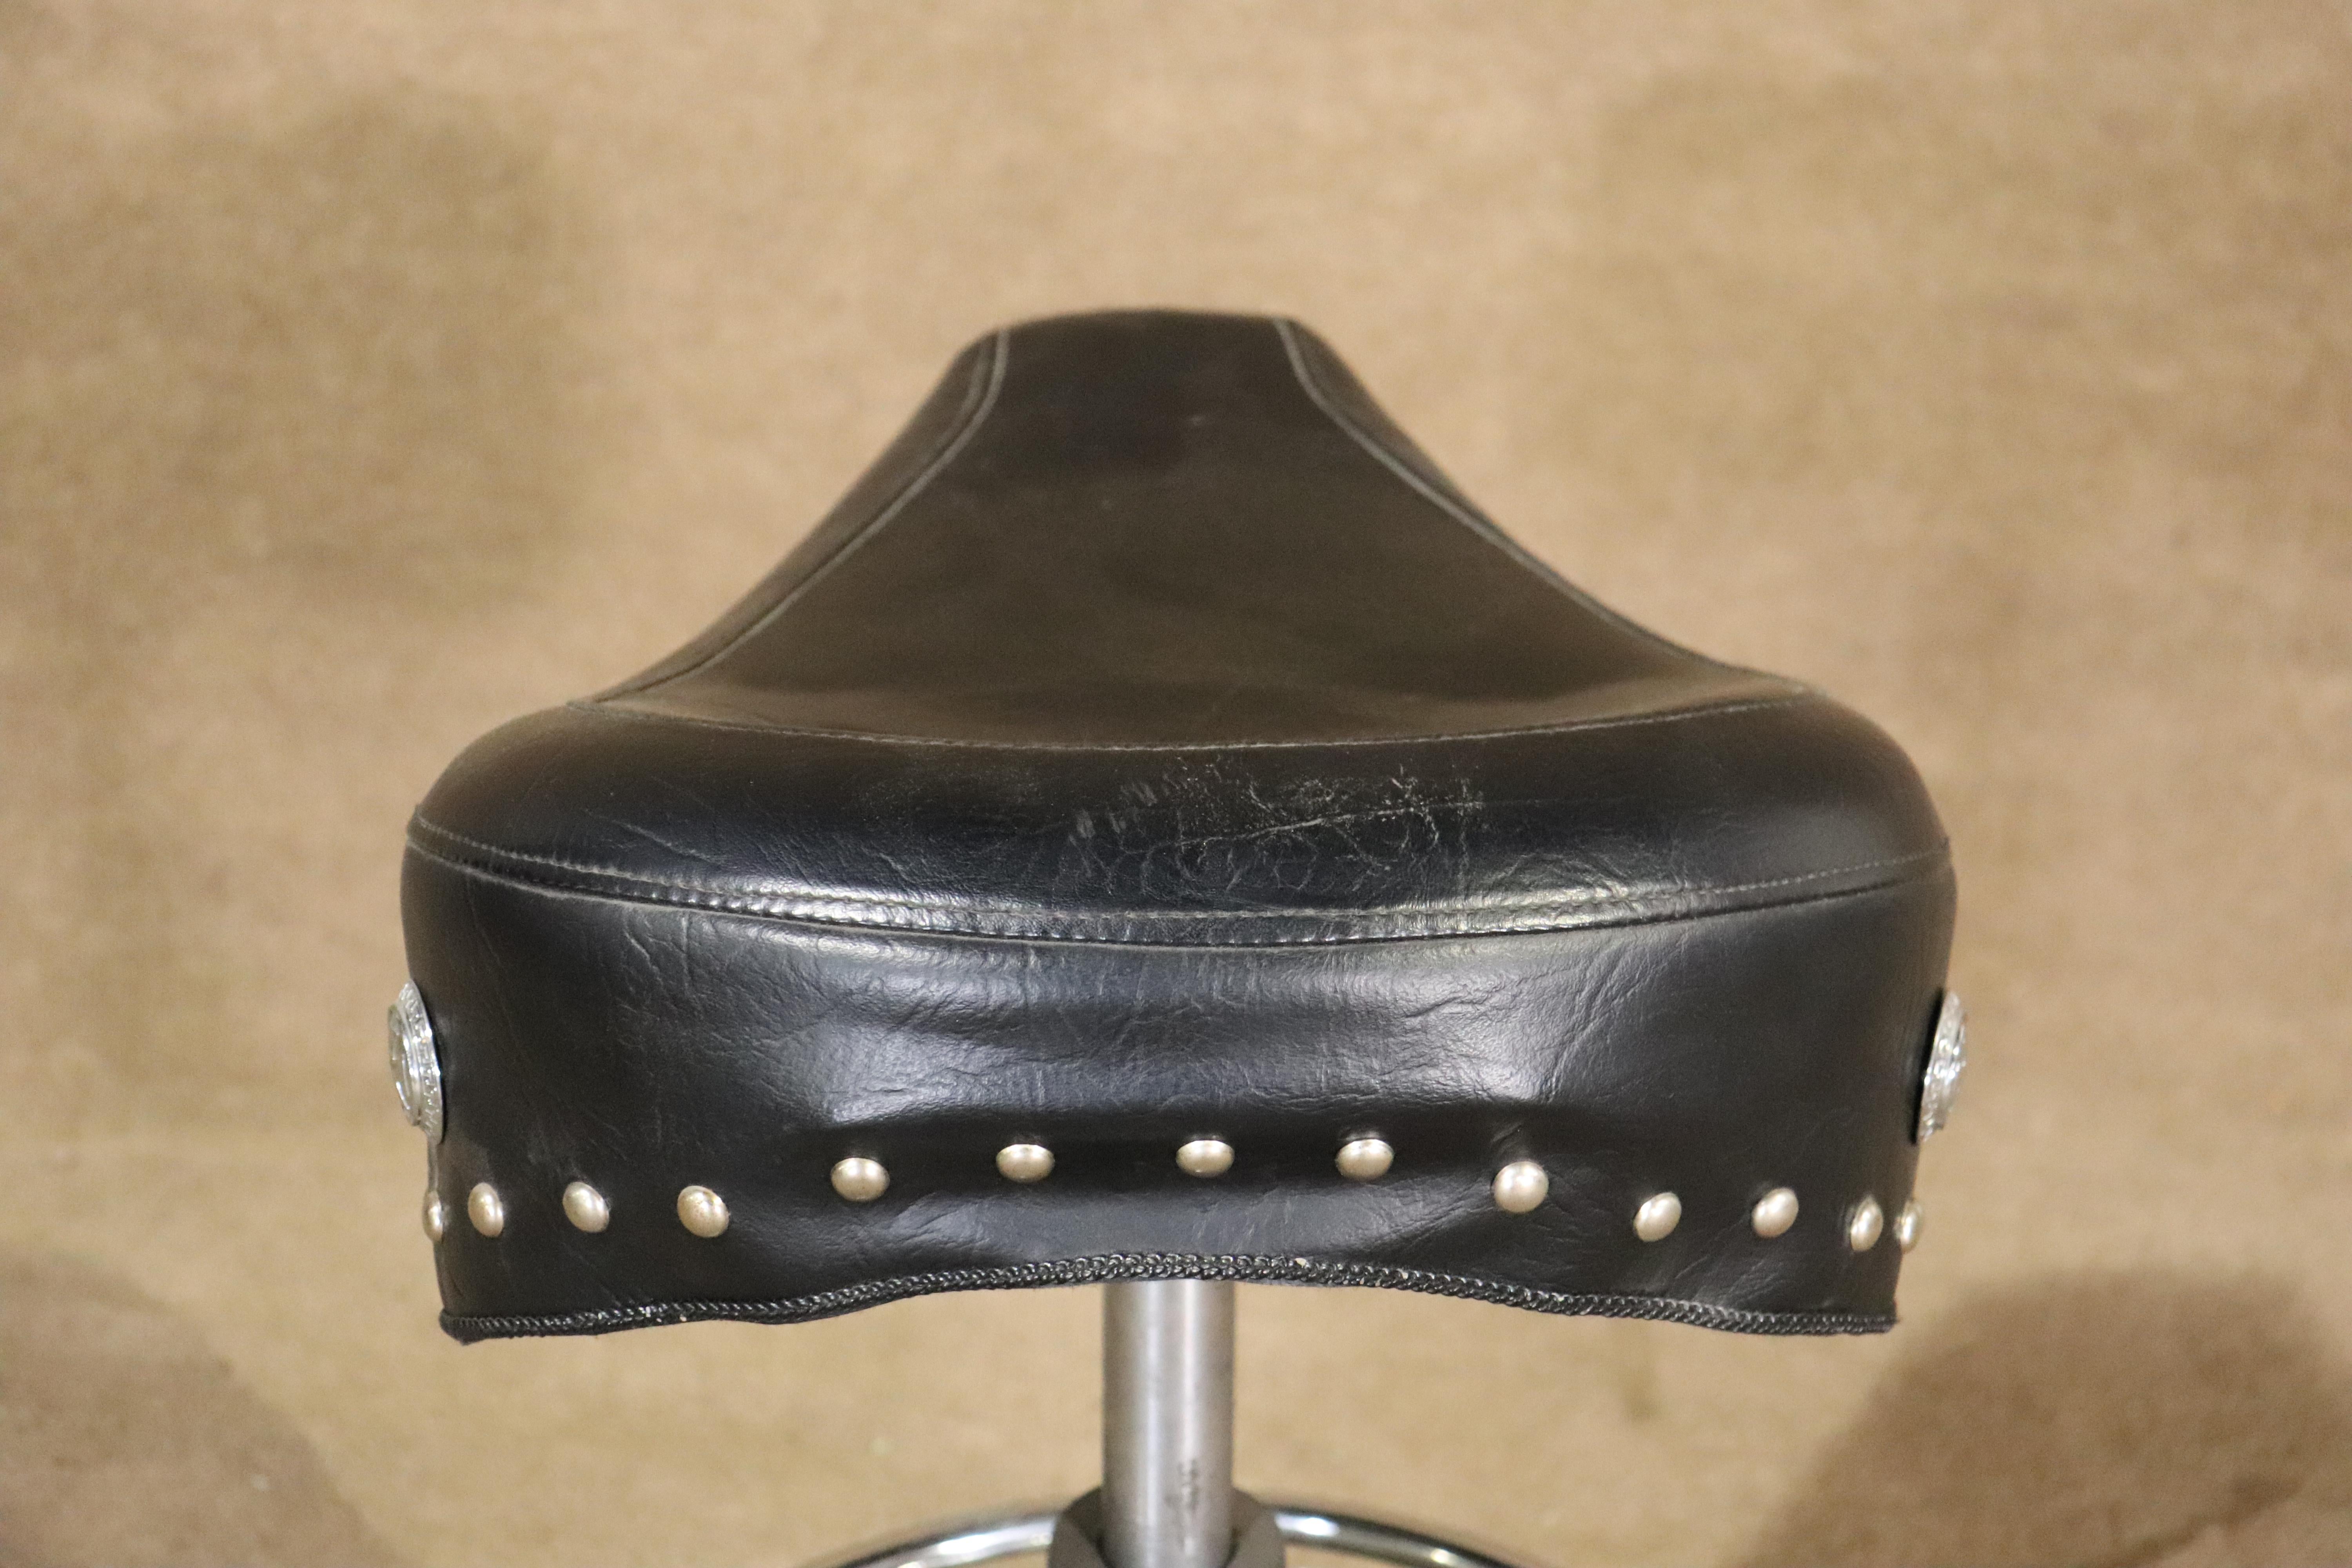 Unique factory stool with motorcycle throne as the seat. Polished chrome base with pneumatic height adjustment.
H: adjustable 23 3/4in - 31in
Please confirm location NY or NJ.